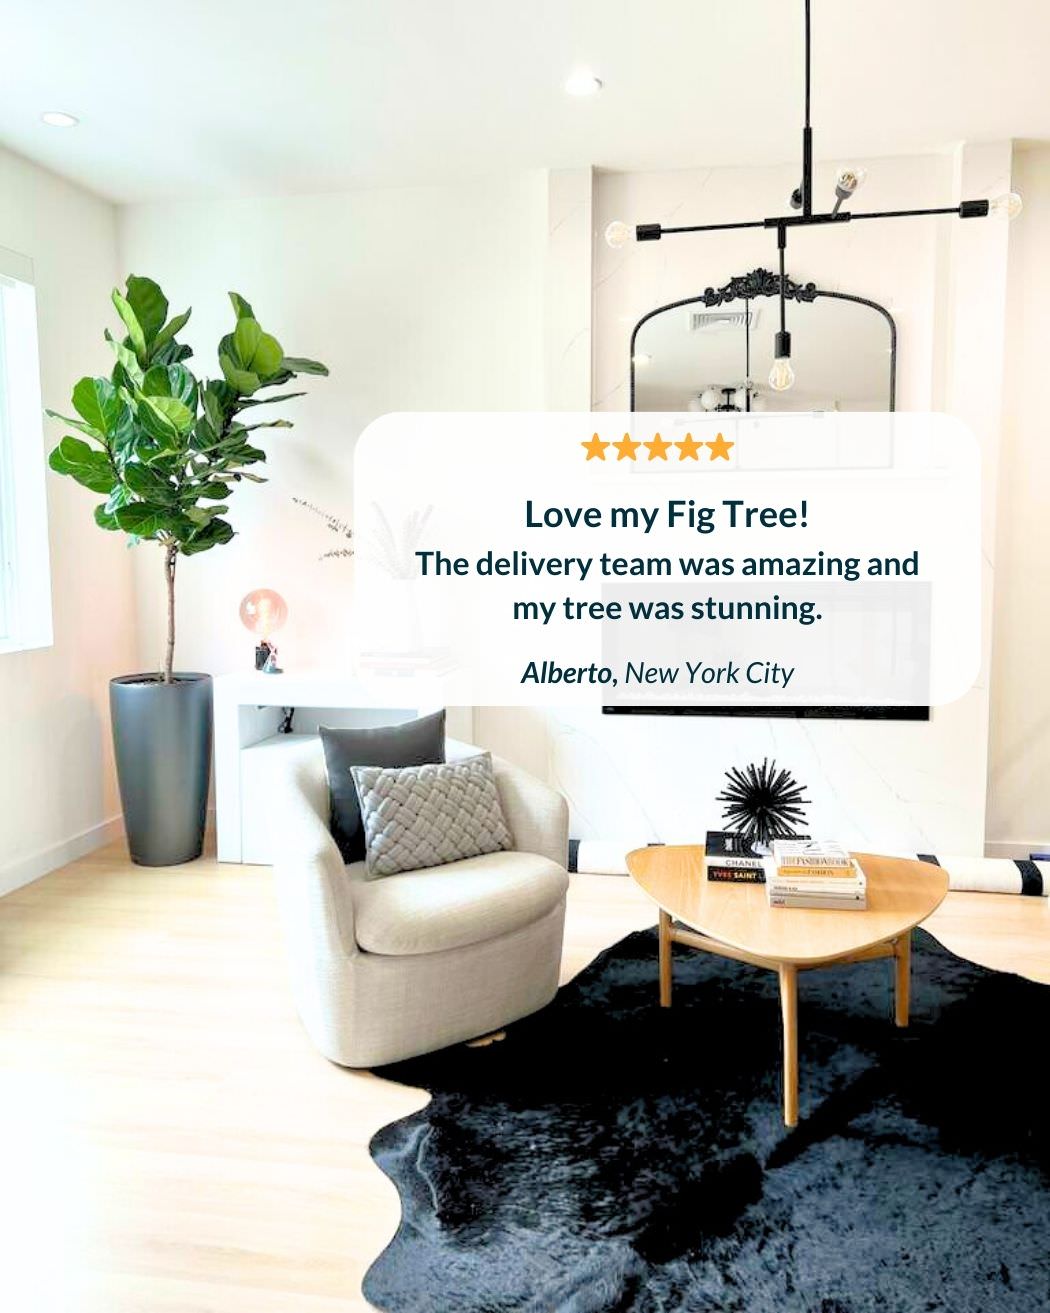 5 star review from a happy Fiddle Leaf Fig buyer